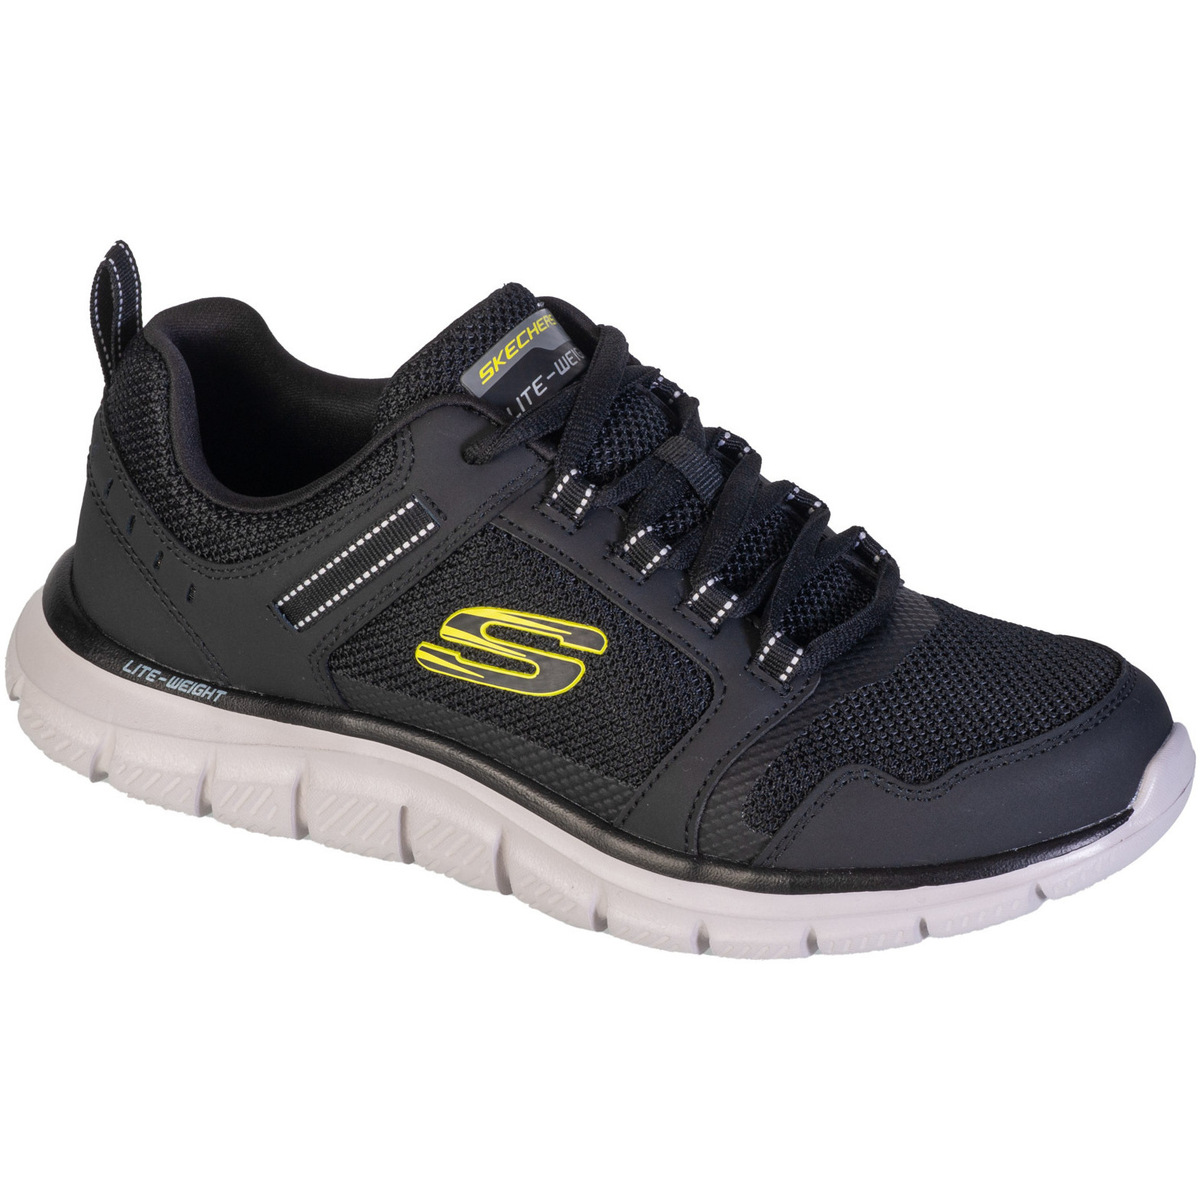 Xαμηλά Sneakers Skechers Track-Knockhill